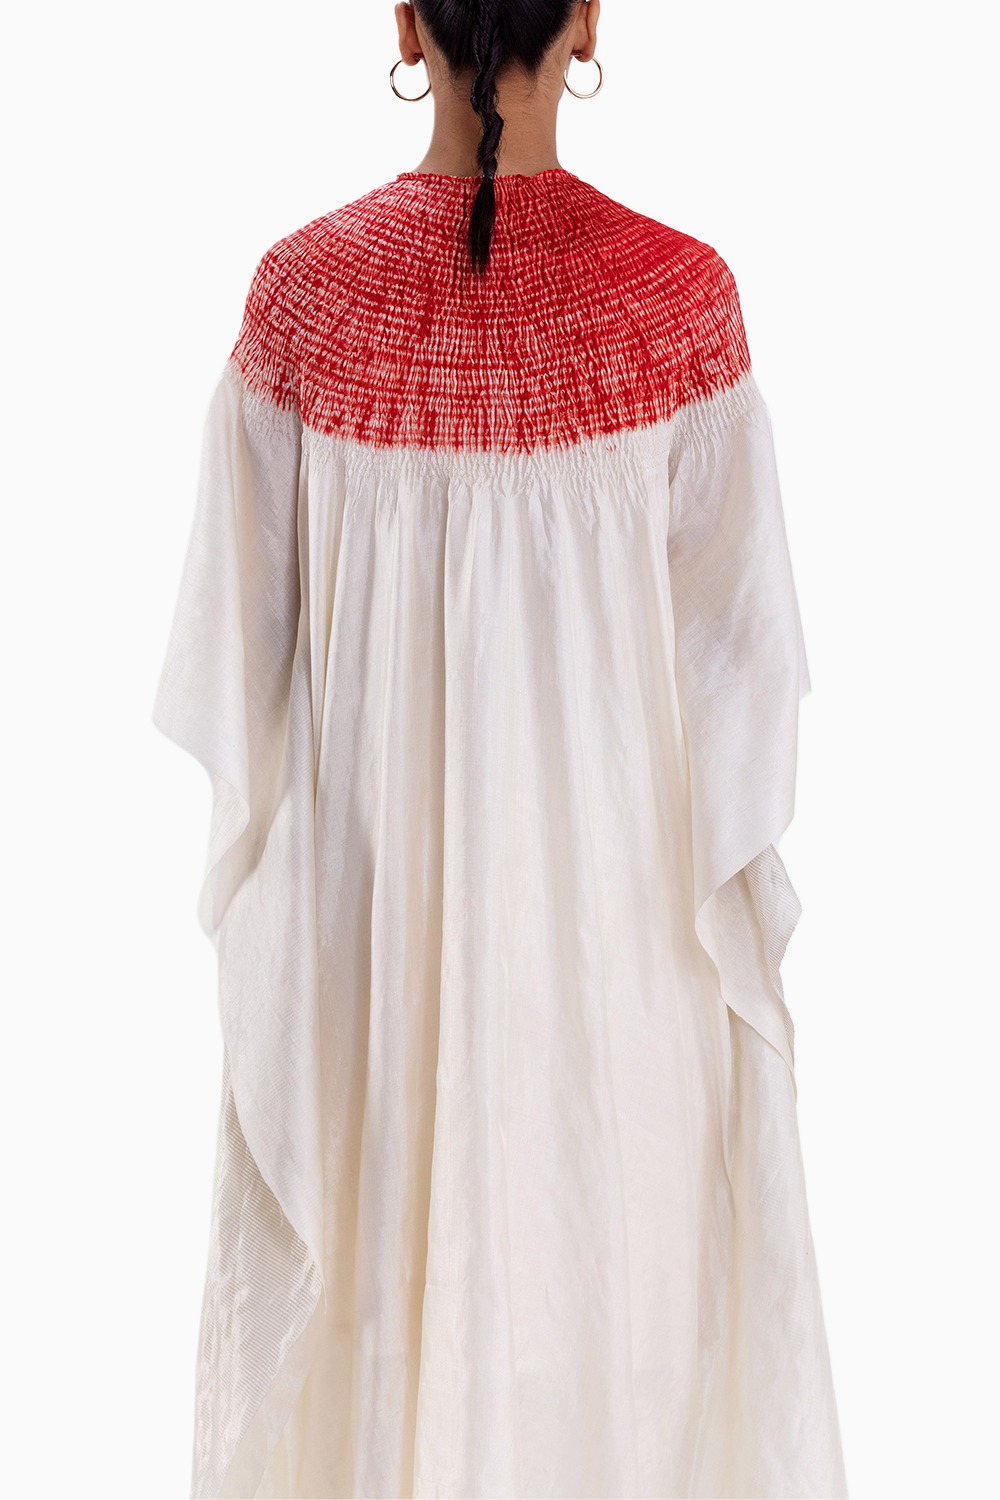 Metallic Ivory and Red Sector Kaftan